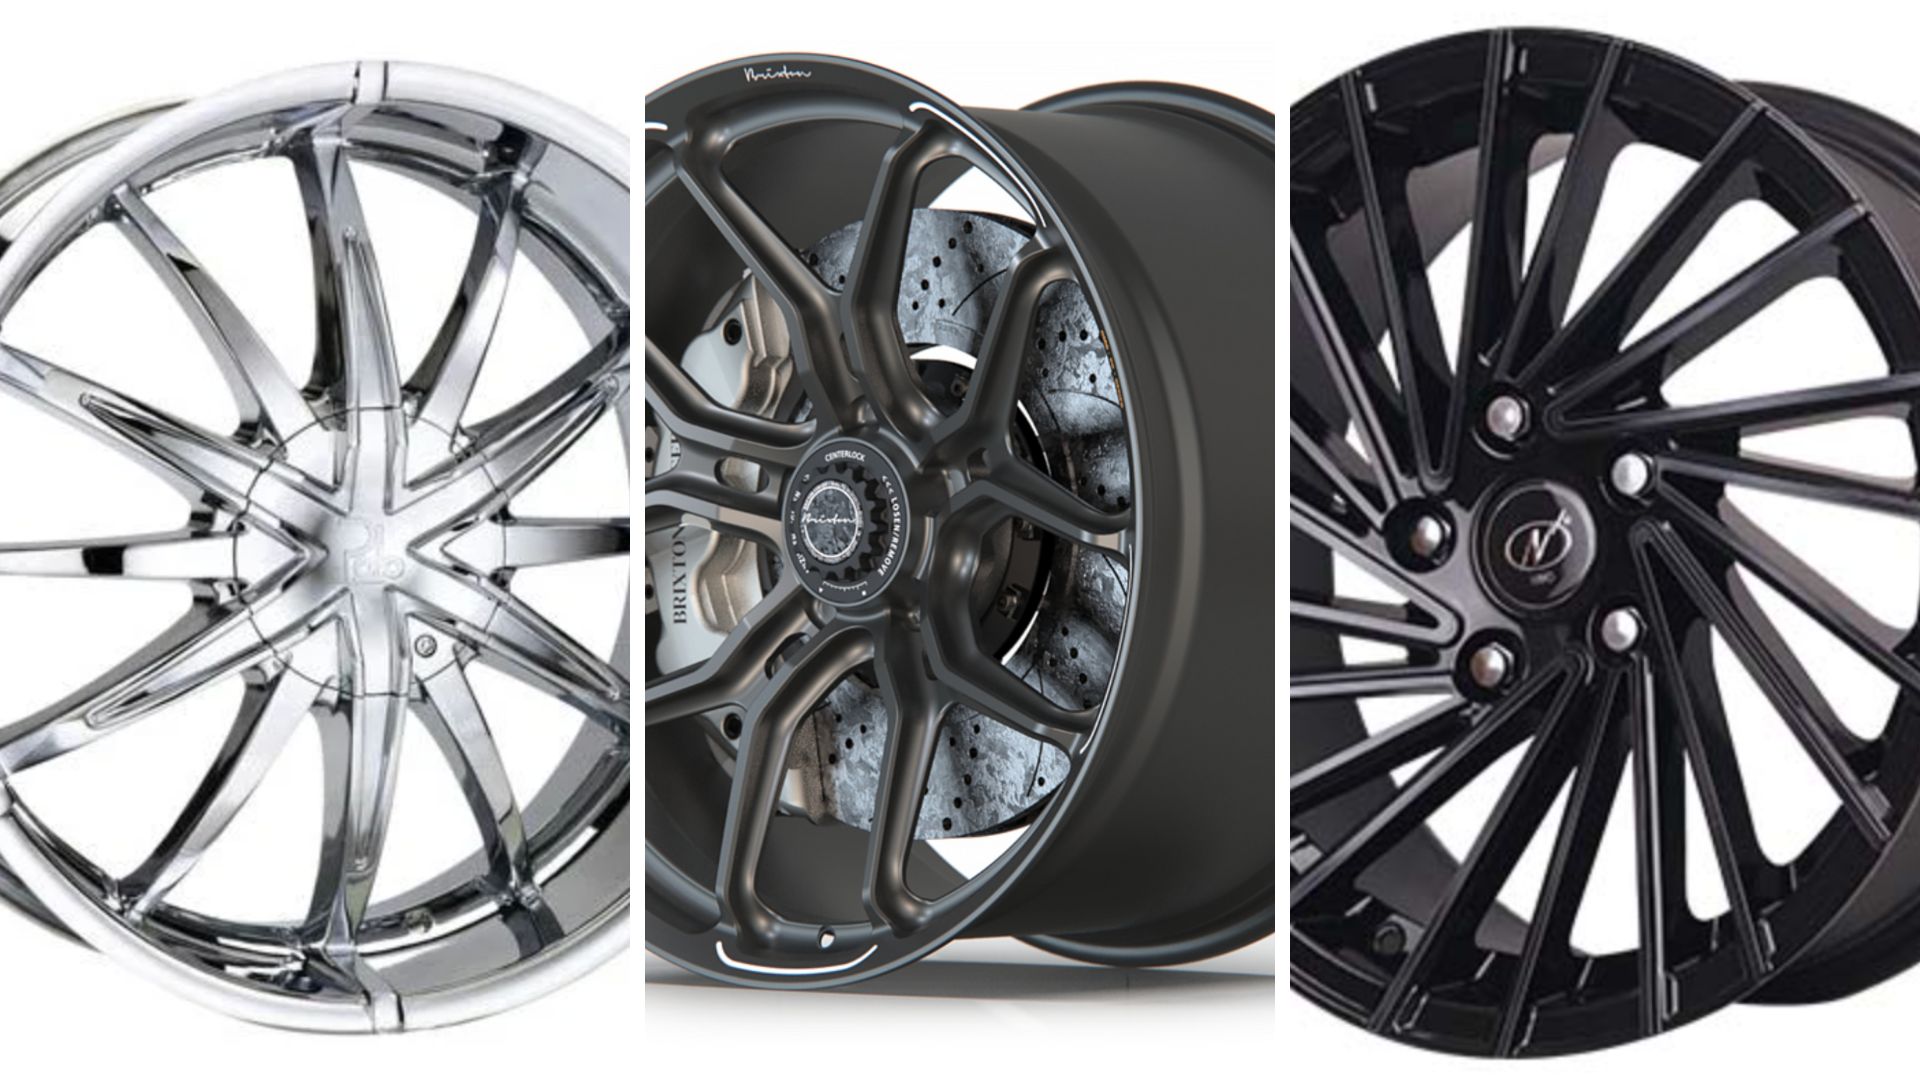 What Are the Different Factors to Consider While Selecting a Rims